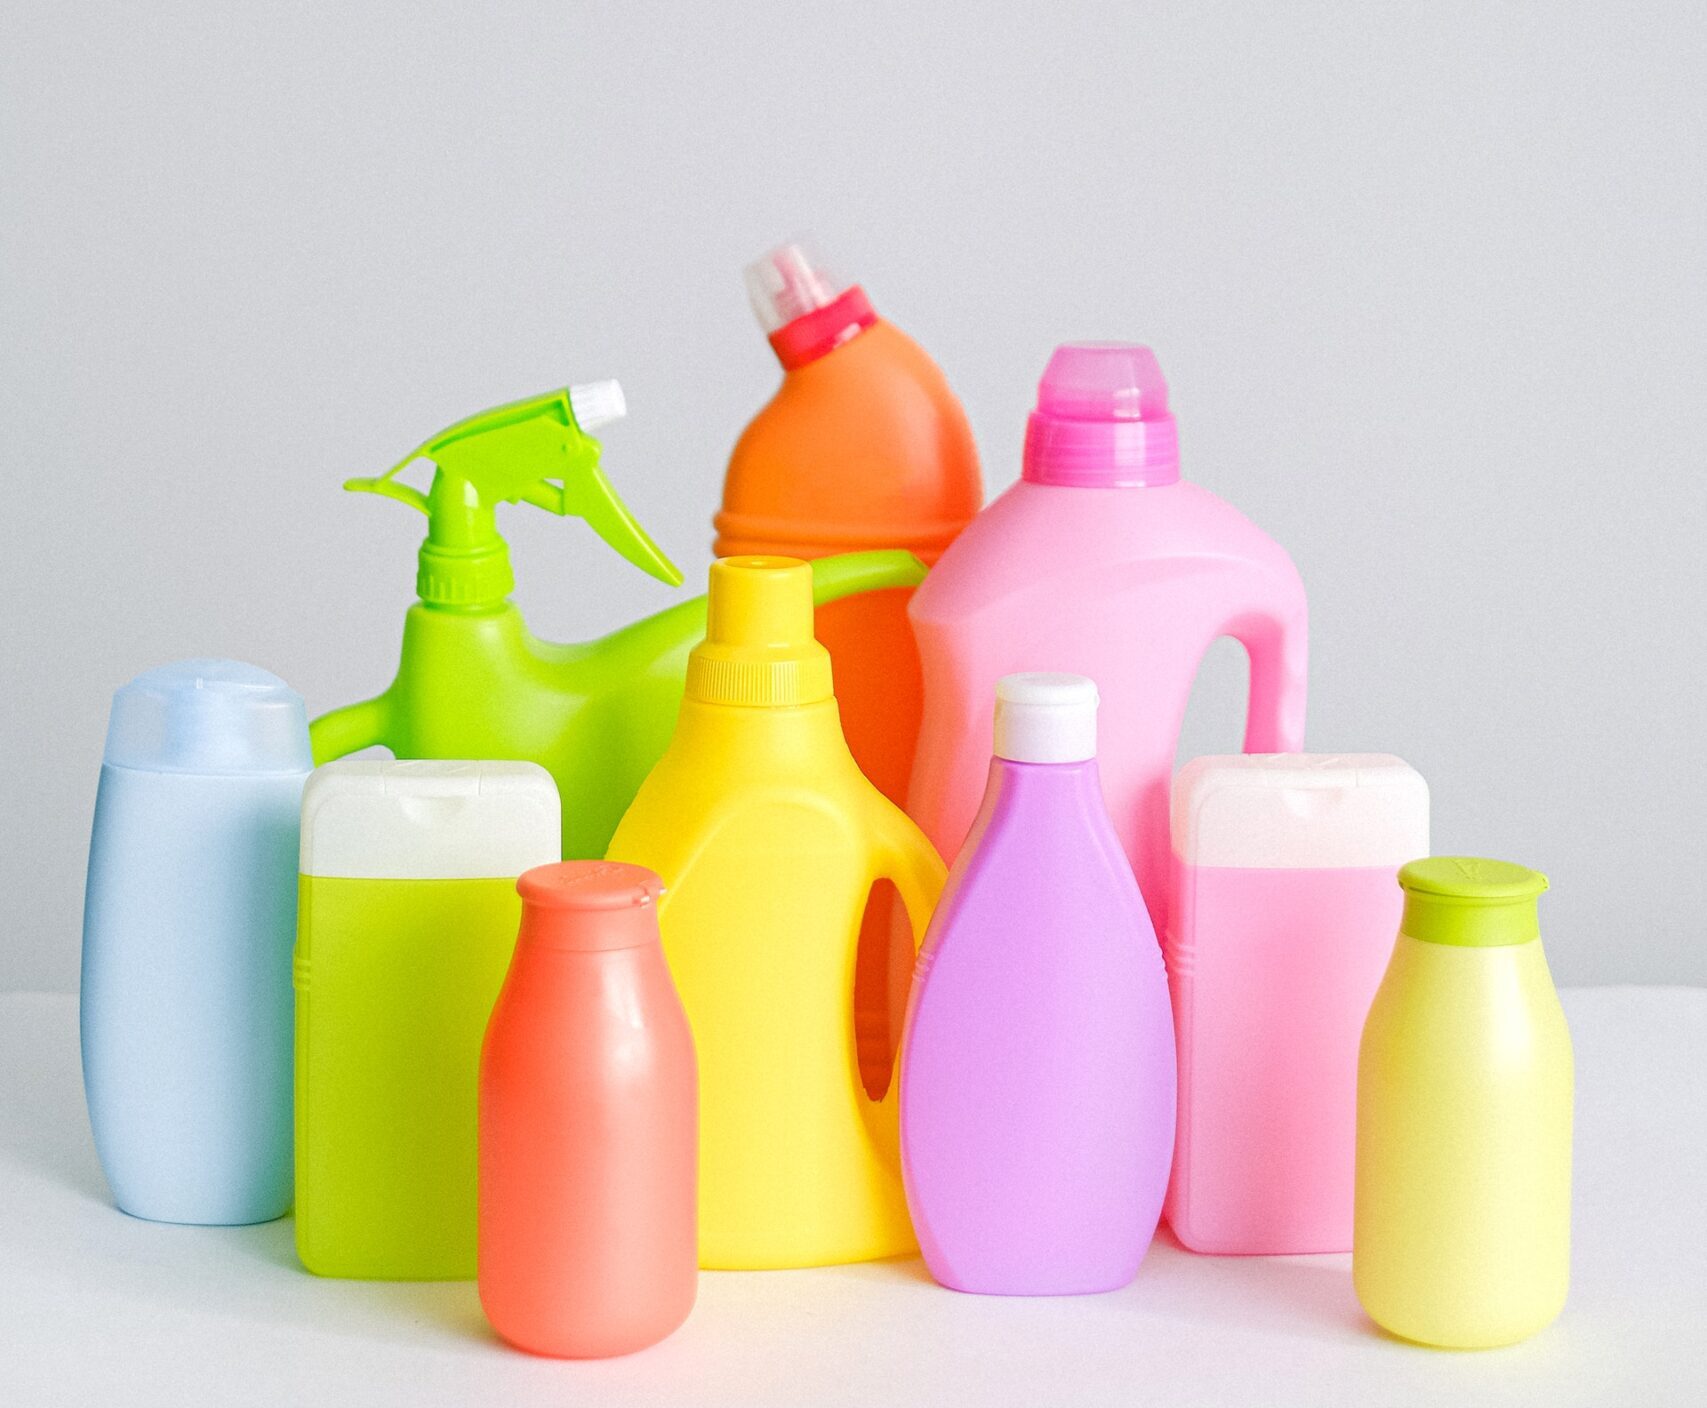 What cleaning products do we use?